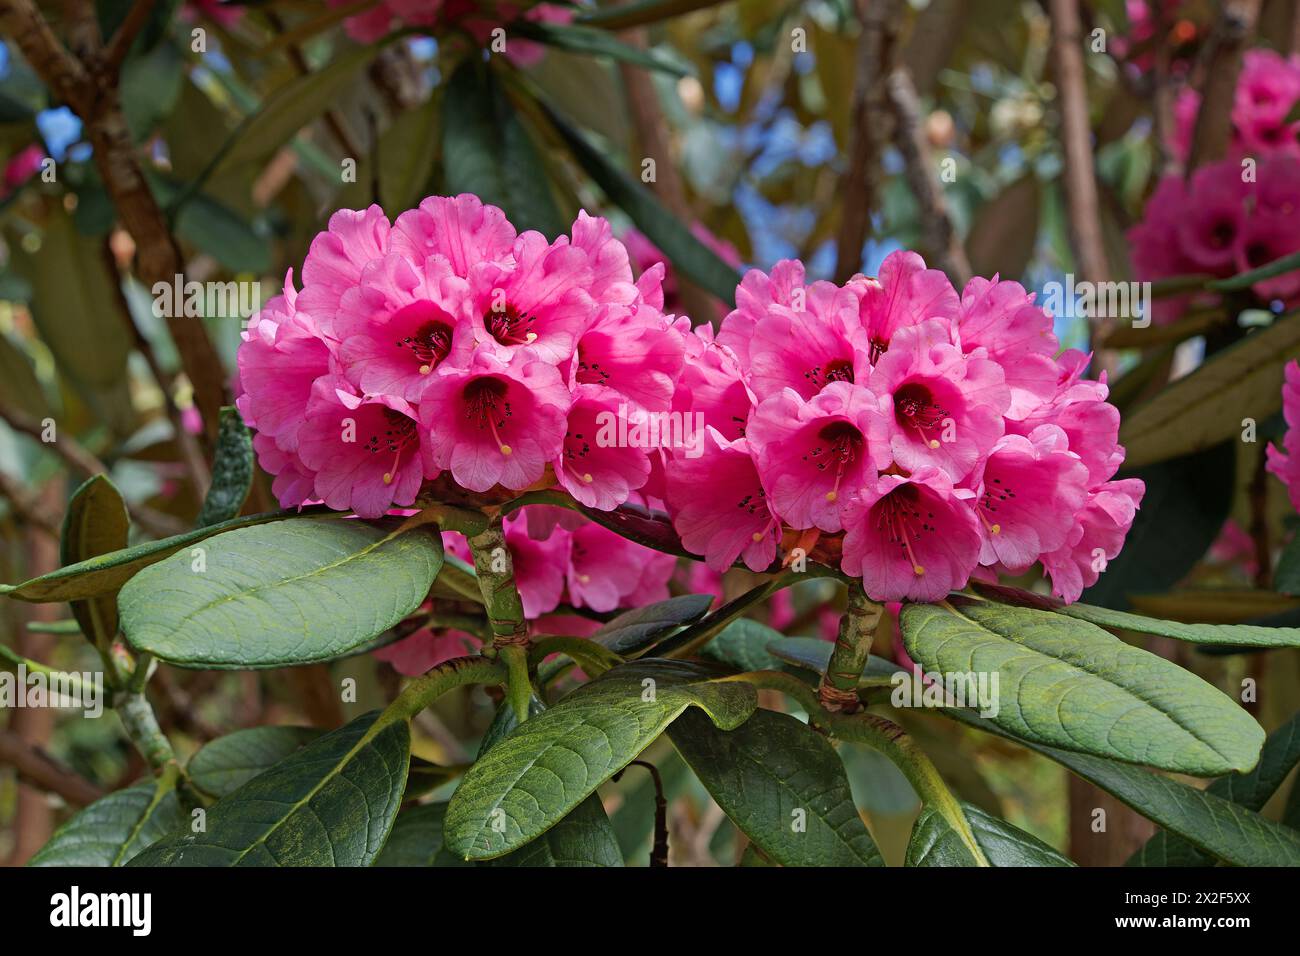 Rhododendron kesangiae is a large shrub or tree endemic to Bhutan. It grows at altitudes of 2890 to 3450 m in fir and hemlock forests. Stock Photo